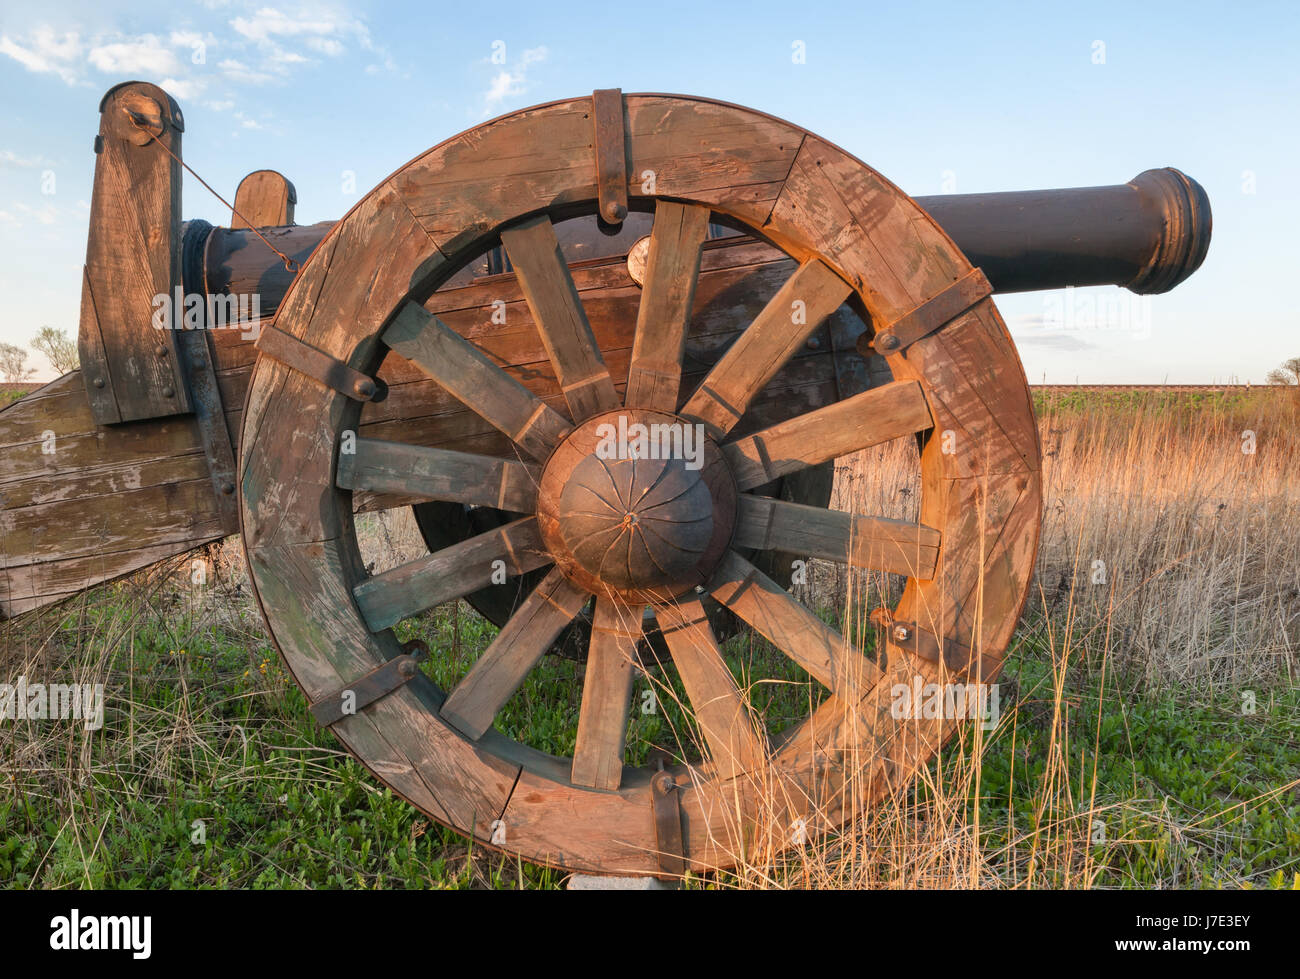 Large wooden wheel of old cannon Stock Photo